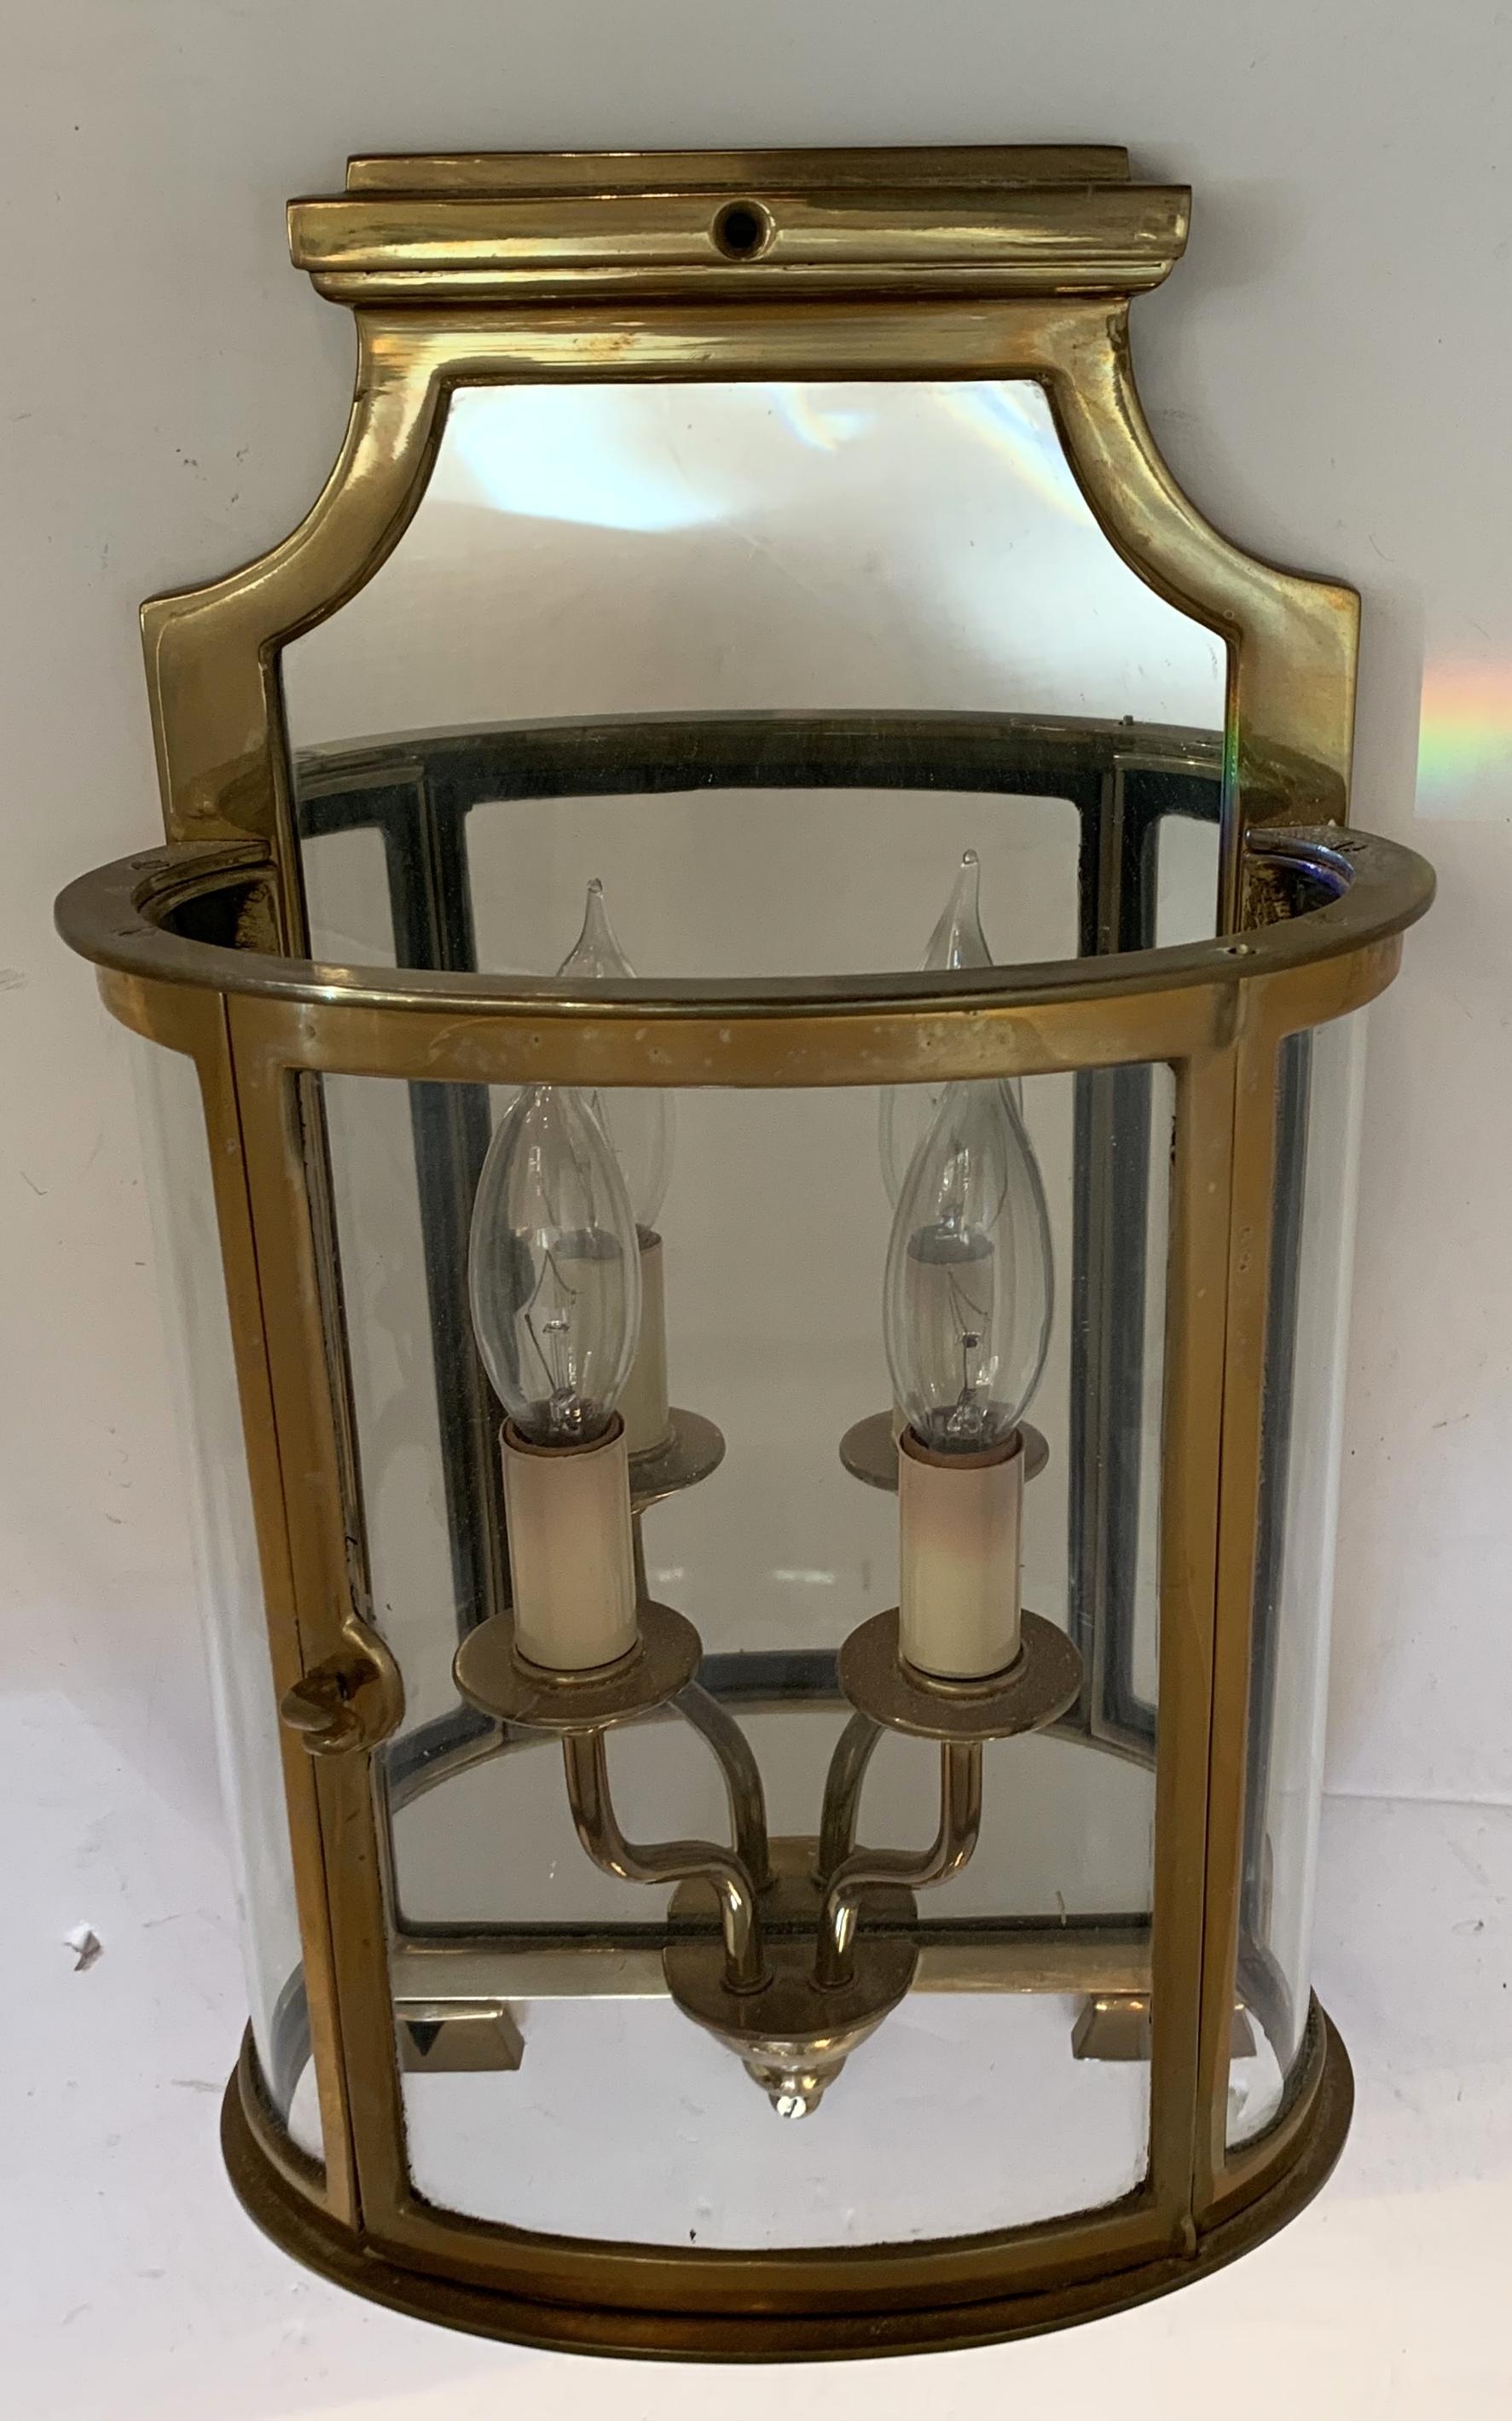 Wonderful pair vintage English style wall lantern from Vaughan, this beautiful design has curved glass door encasing a mirrored back to reflect the light of the two candelabra lights inside and exceptional cast bronze detailing. Rewired and ready to